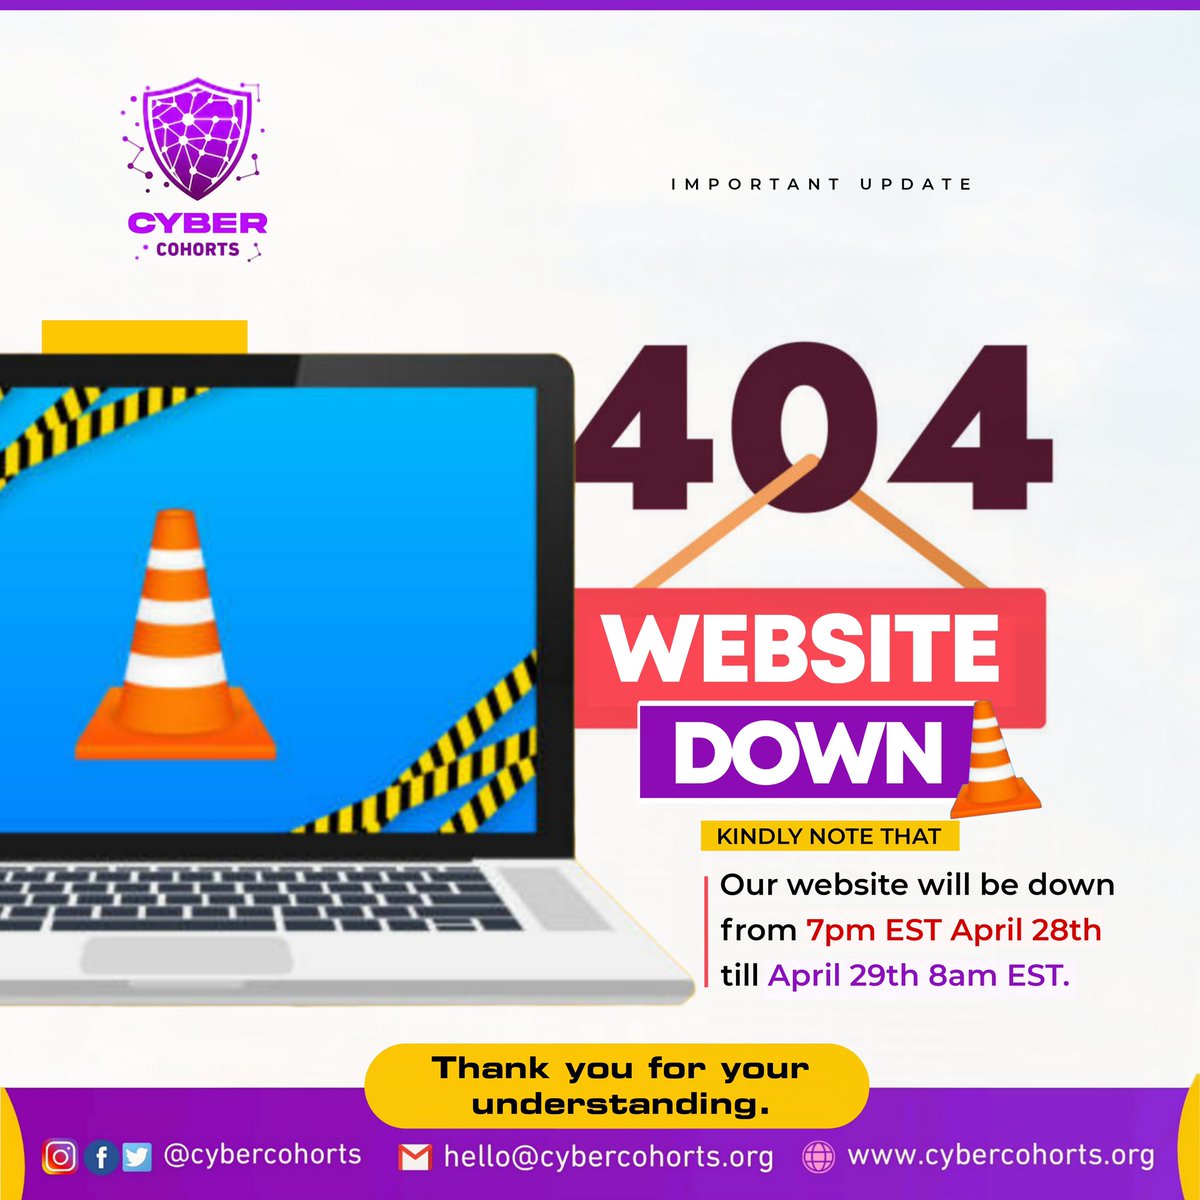 ⚠️ Website Maintenance Notice ⚠️

Our website will be down for scheduled maintenance from 7pm EST on April 28th until April 29th at 8am EST. We apologize for any inconvenience. Thank you for your patience! #WebsiteMaintenance #Cybercohorts